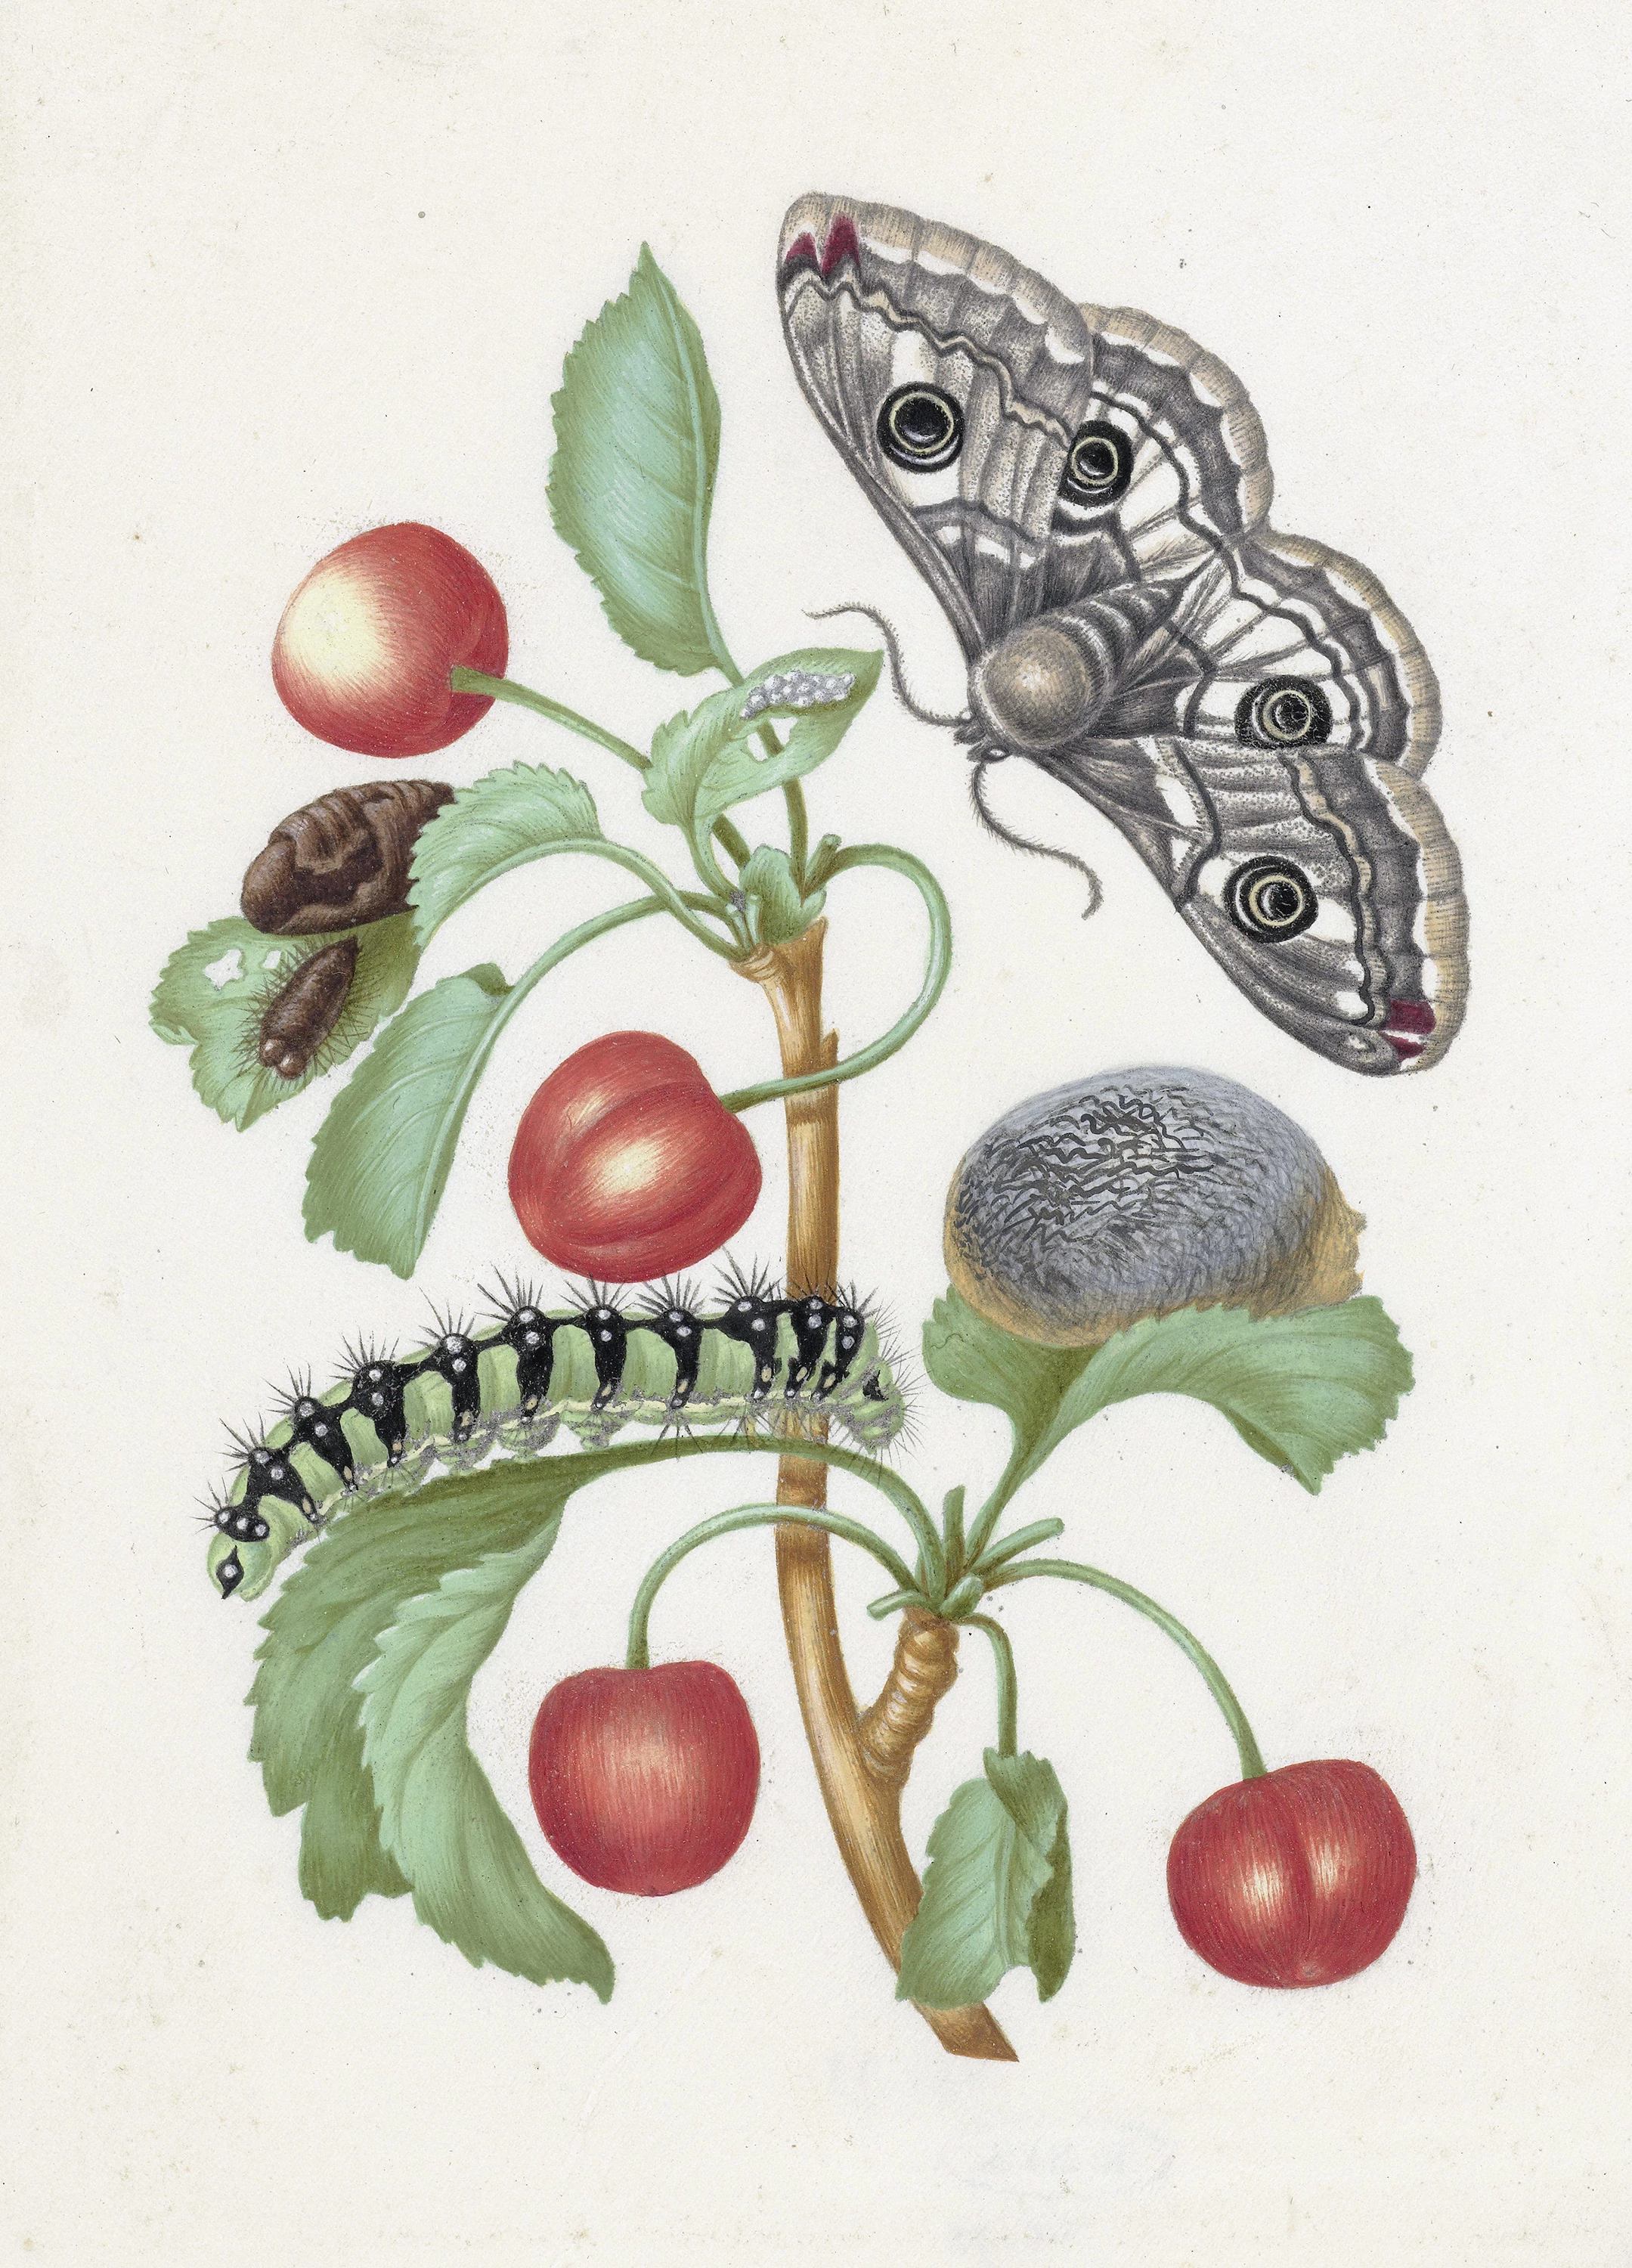 Metamorphosis of a Caterpillar to a Butterfly, Maria Sibylla Merian